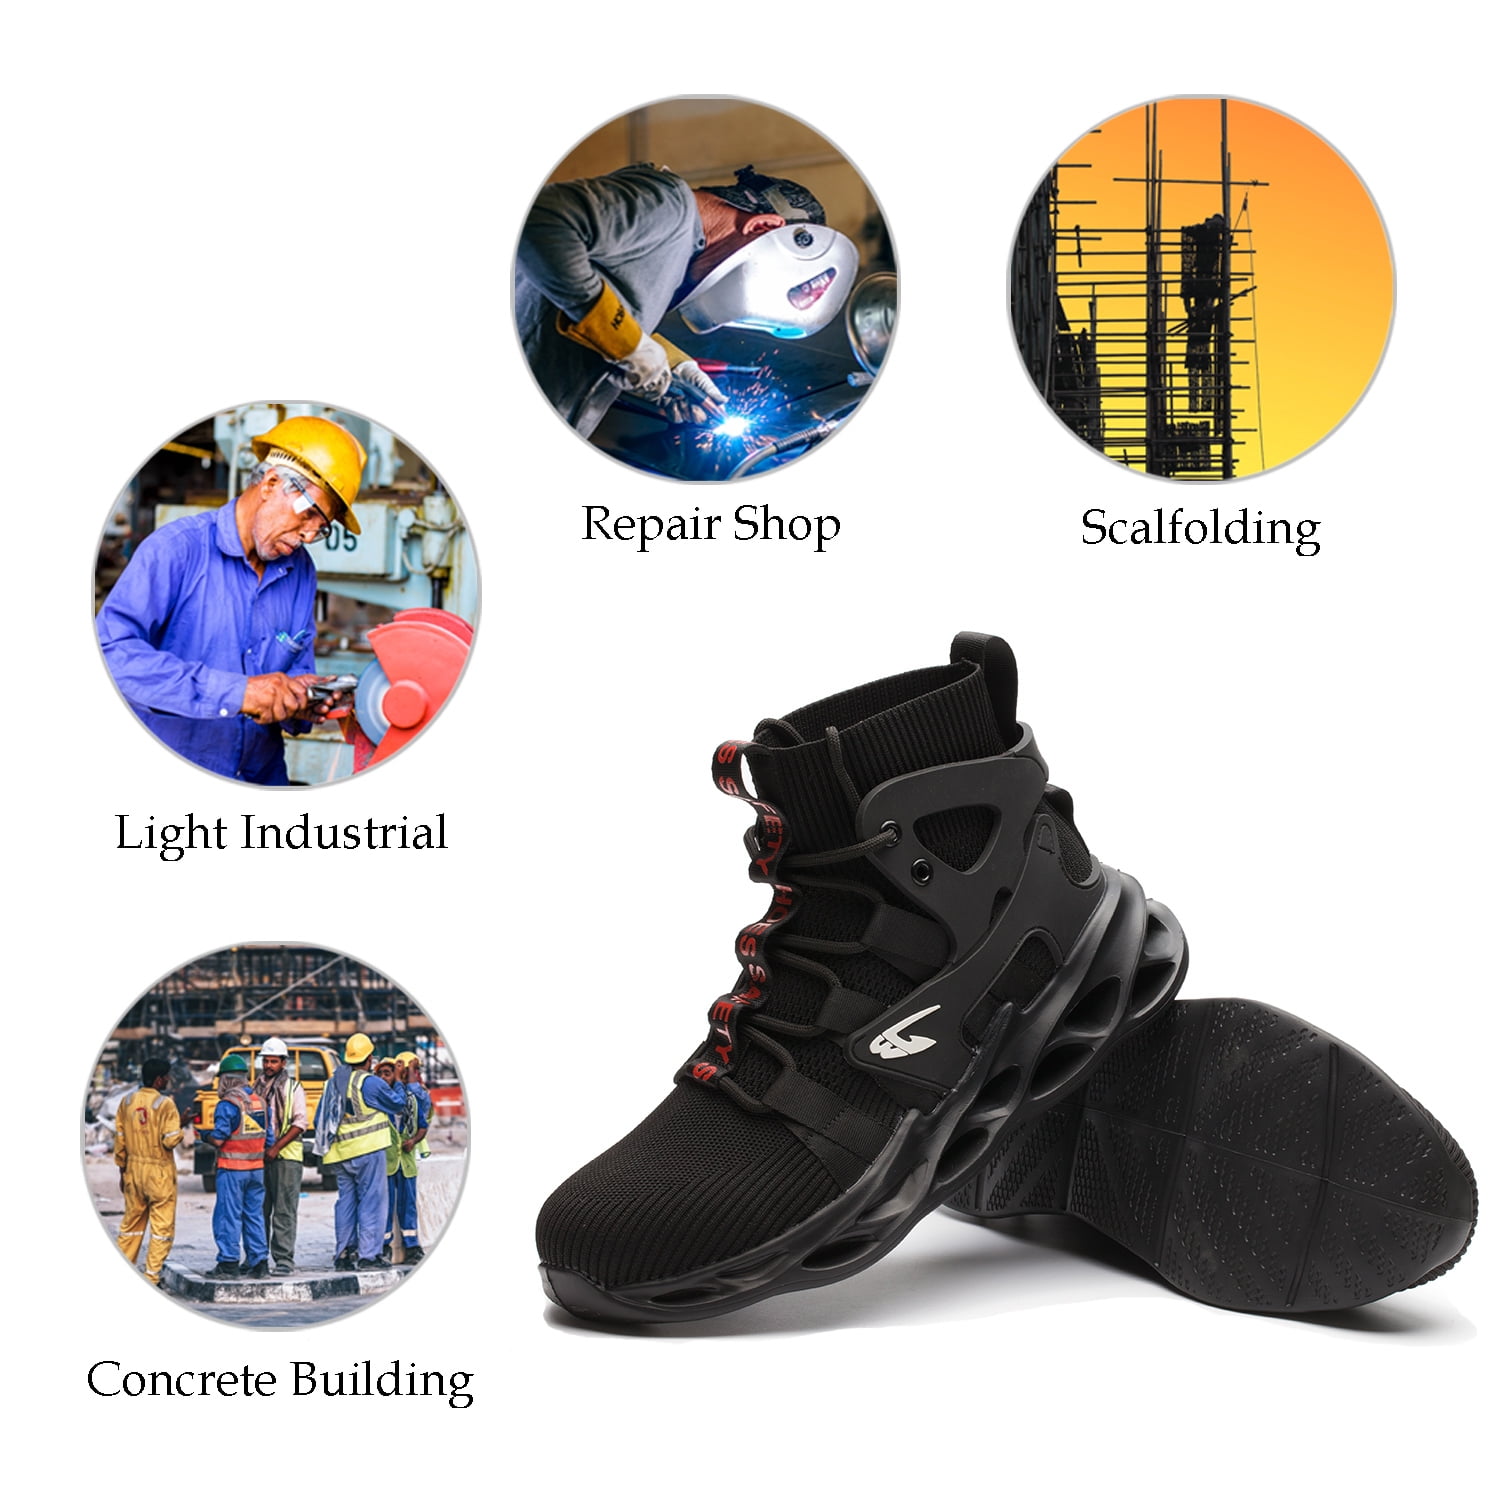 ORISTACO Steel Toe Work Boots Indestructible Water-Resistant Lightweight Protection Construction Safety Footwear 